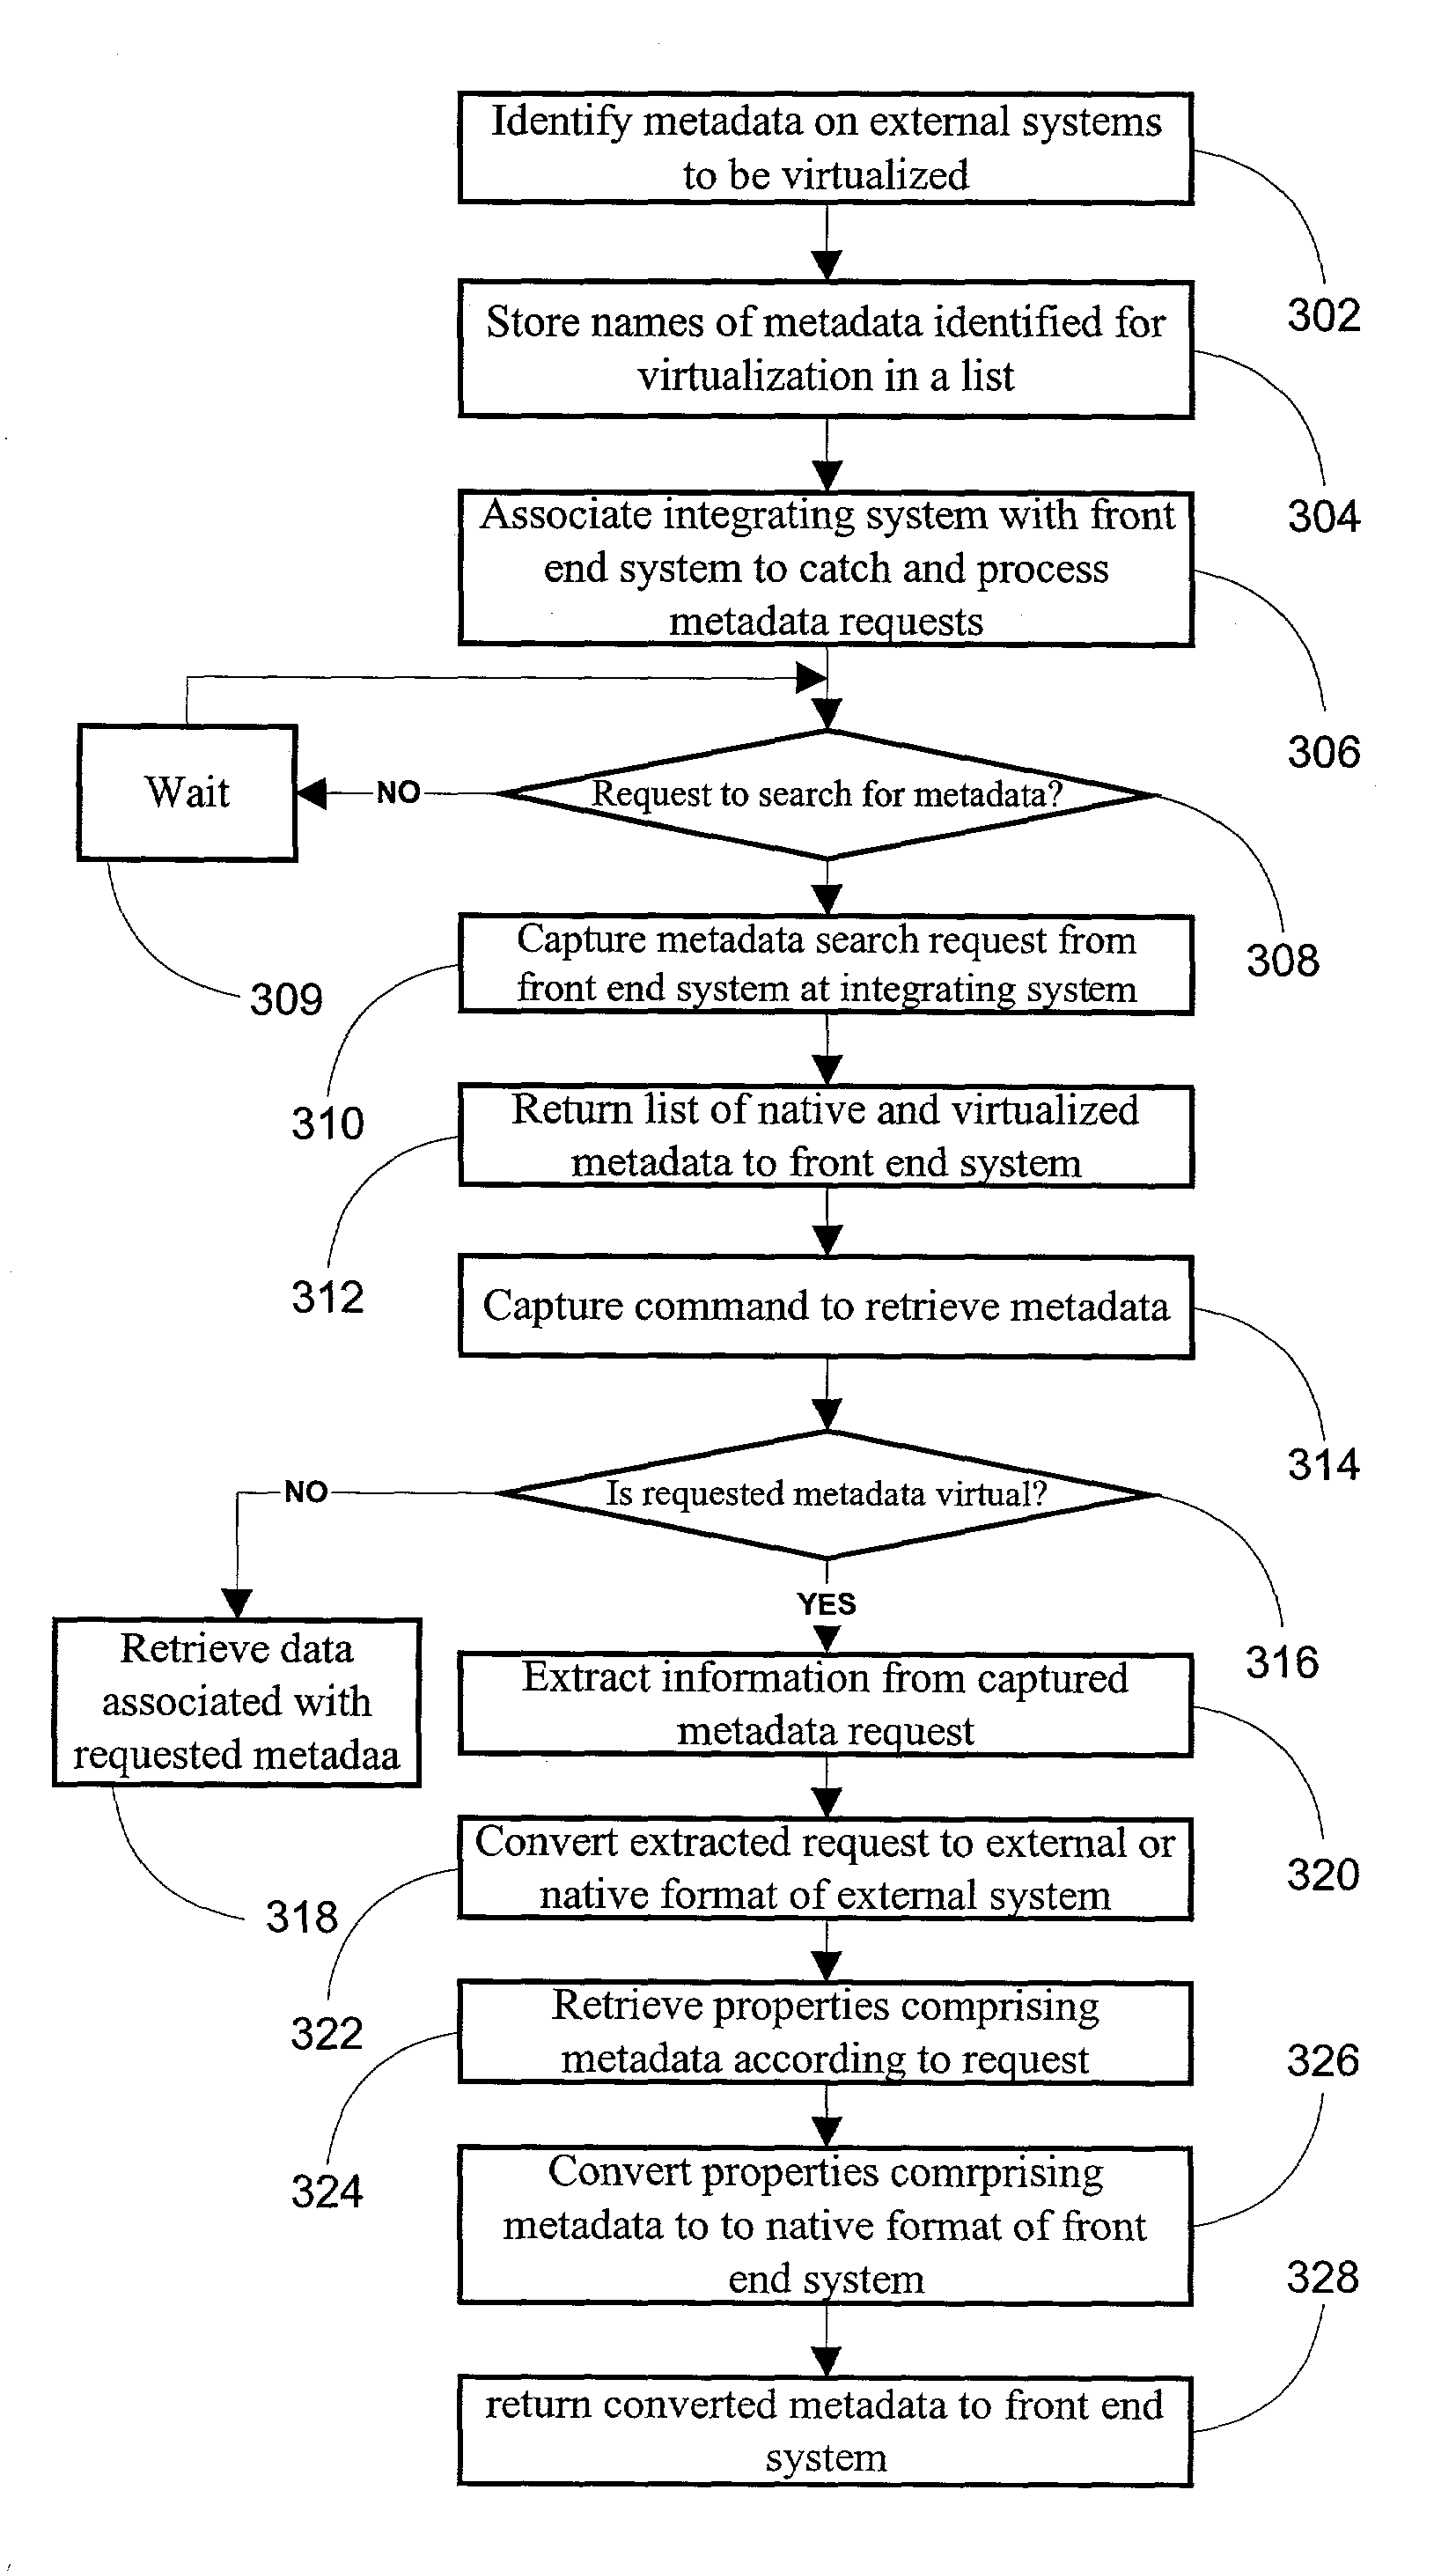 Method and system for virtualizing metadata between disparate systems